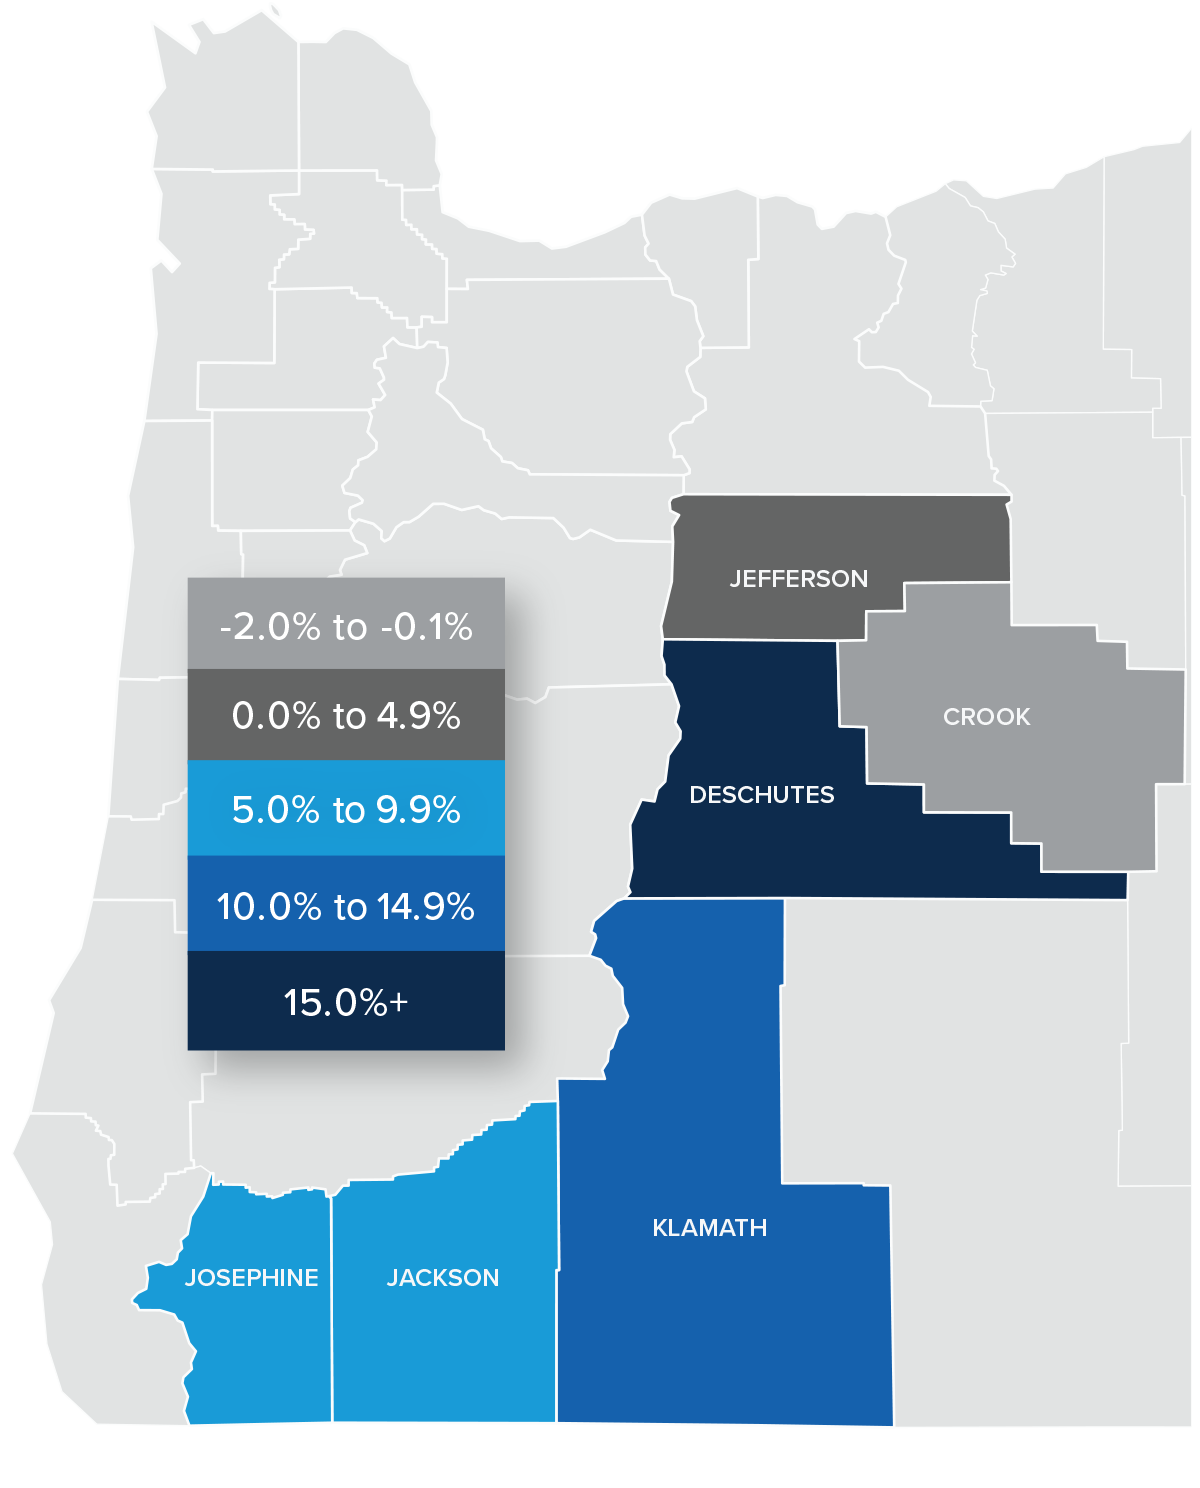 A map showing the real estate home prices percentage changes for various counties in Central and Southern Oregon. Different colors correspond to different tiers of percentage change. Crook County is the only county with a percentage change in the -2% to -0.1% range, while Jefferson County is the only county in the 0% to 4.9% change range. Josephine and Jackson are in the 5% to 9.9 % change range, Klamath is in the 10% to 14.9% change range, and Deschutes is the only county in the 15% + range.